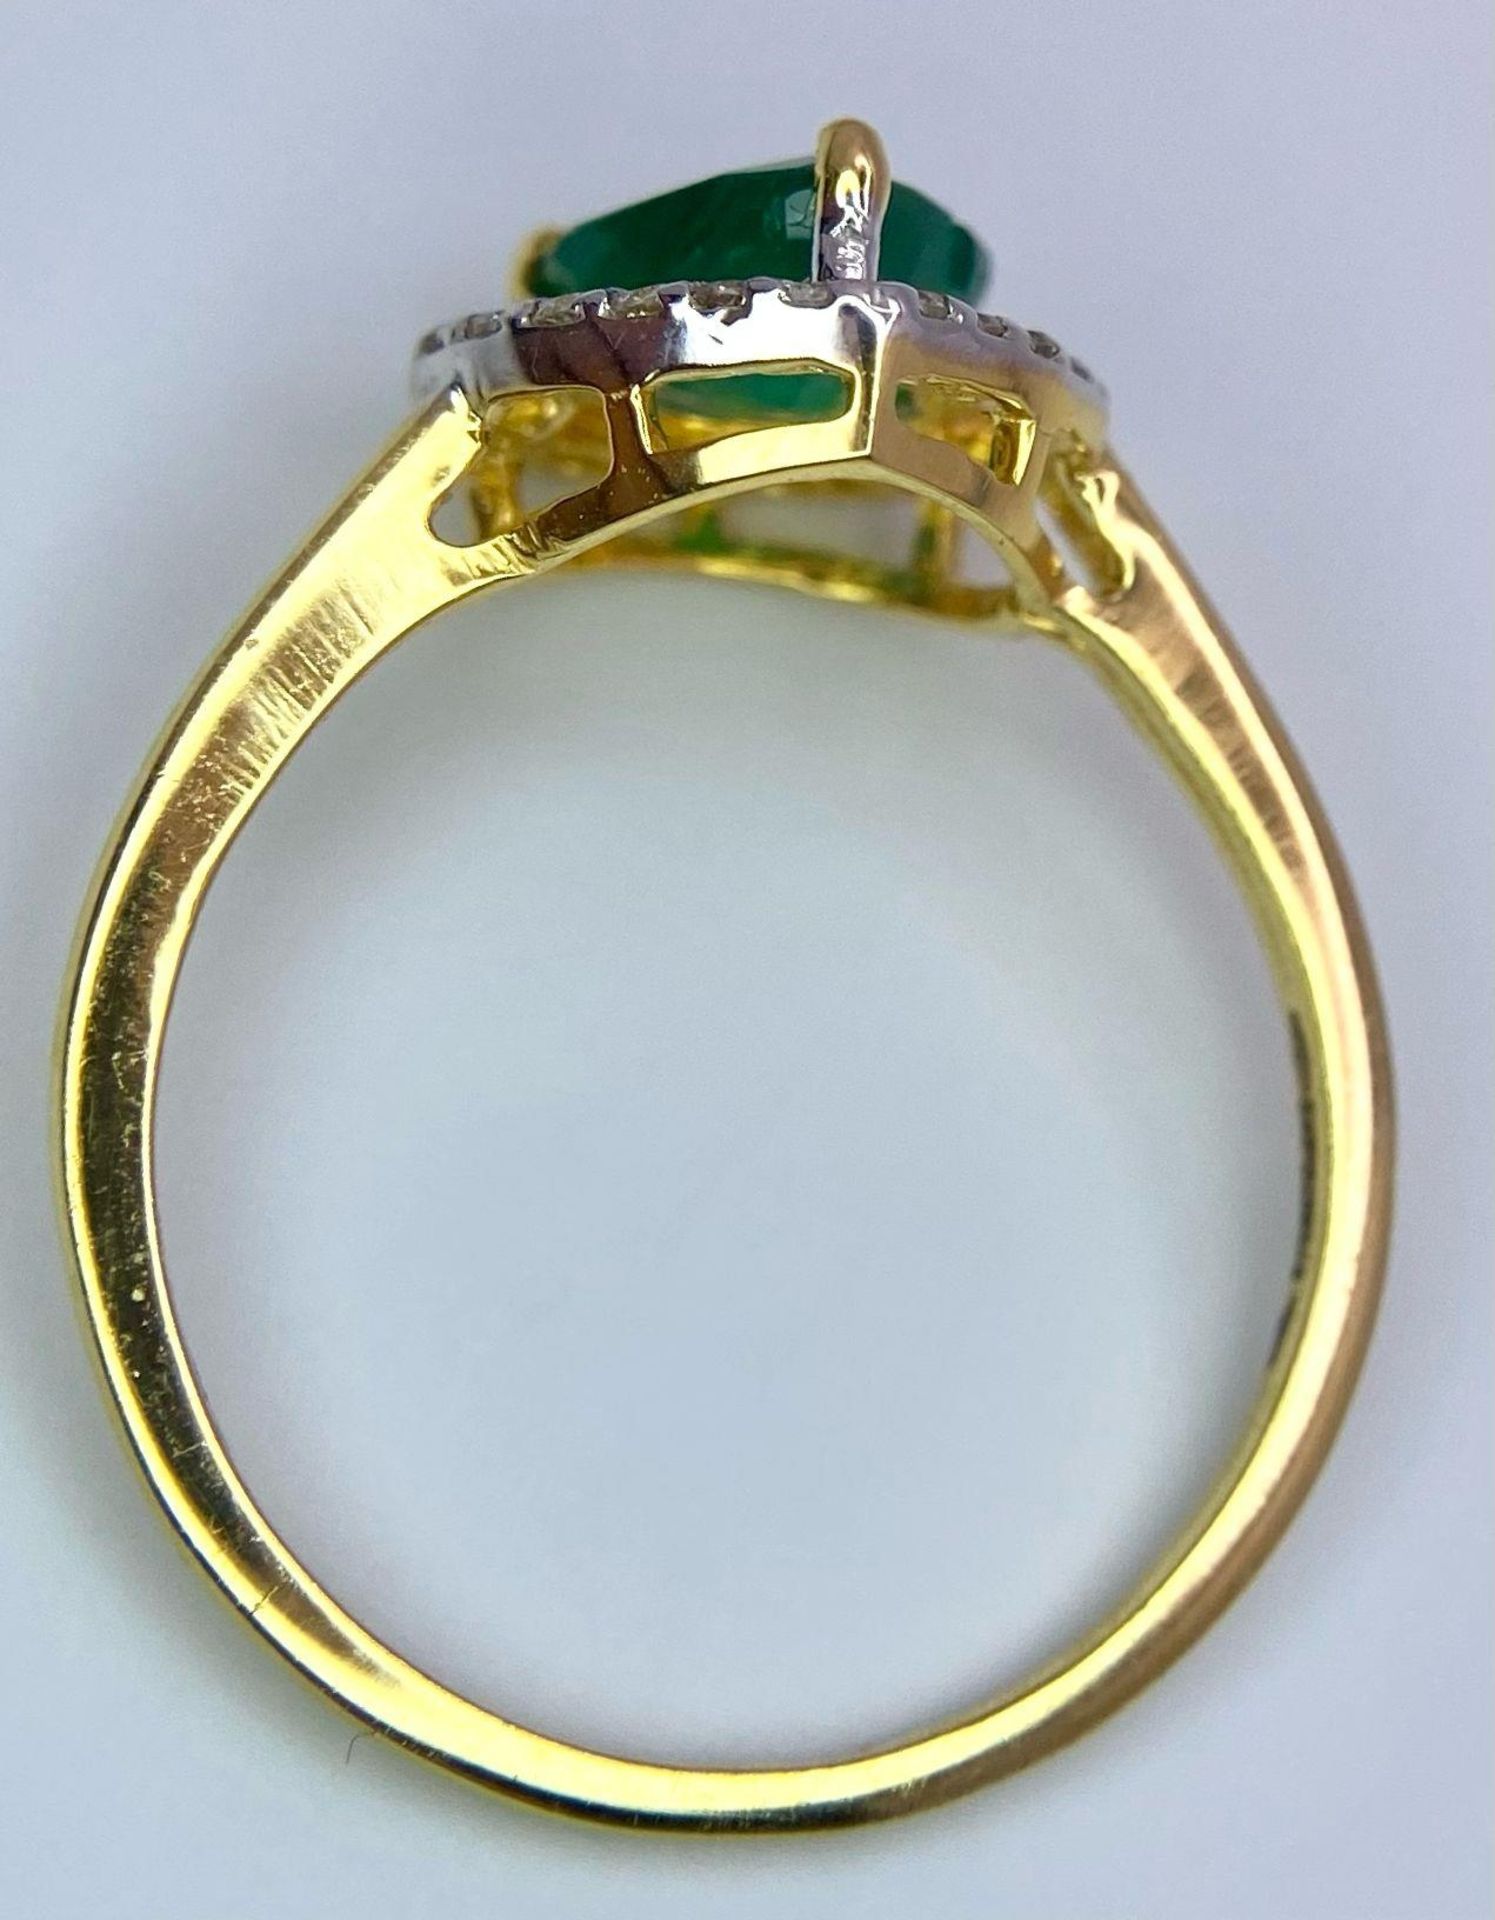 A 14K Gold Heart Shaped Emerald Gemstone Ring - with 0.18ctw of Diamond Accents. Emerald - 0.75ct. - Image 3 of 7